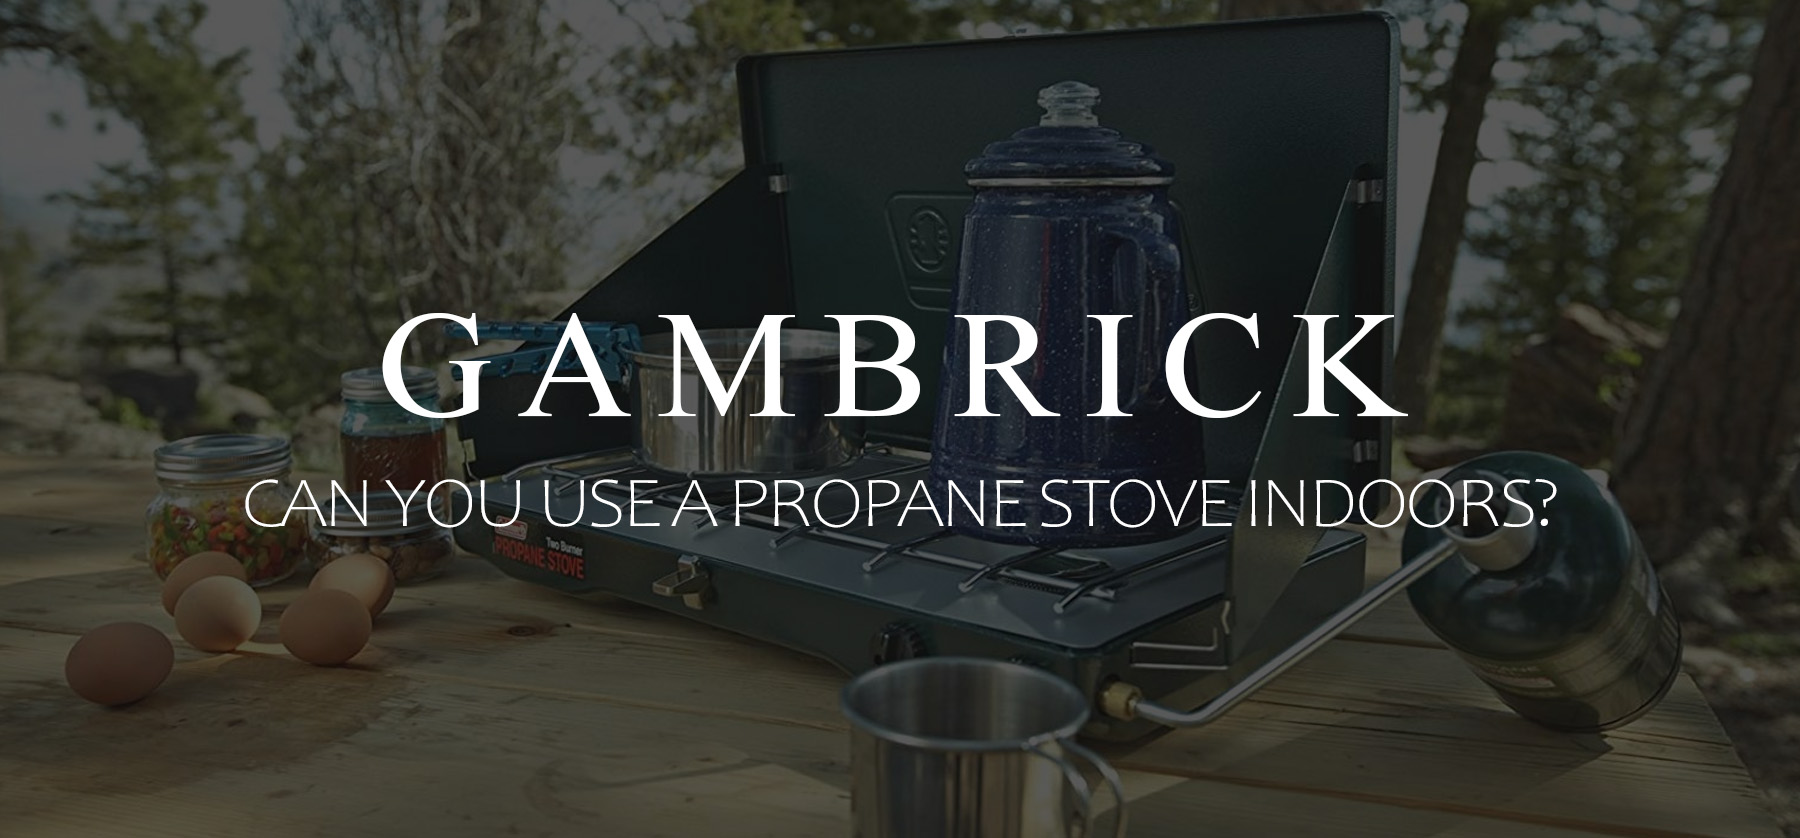 can you use a propane stove indoors banner 1.0